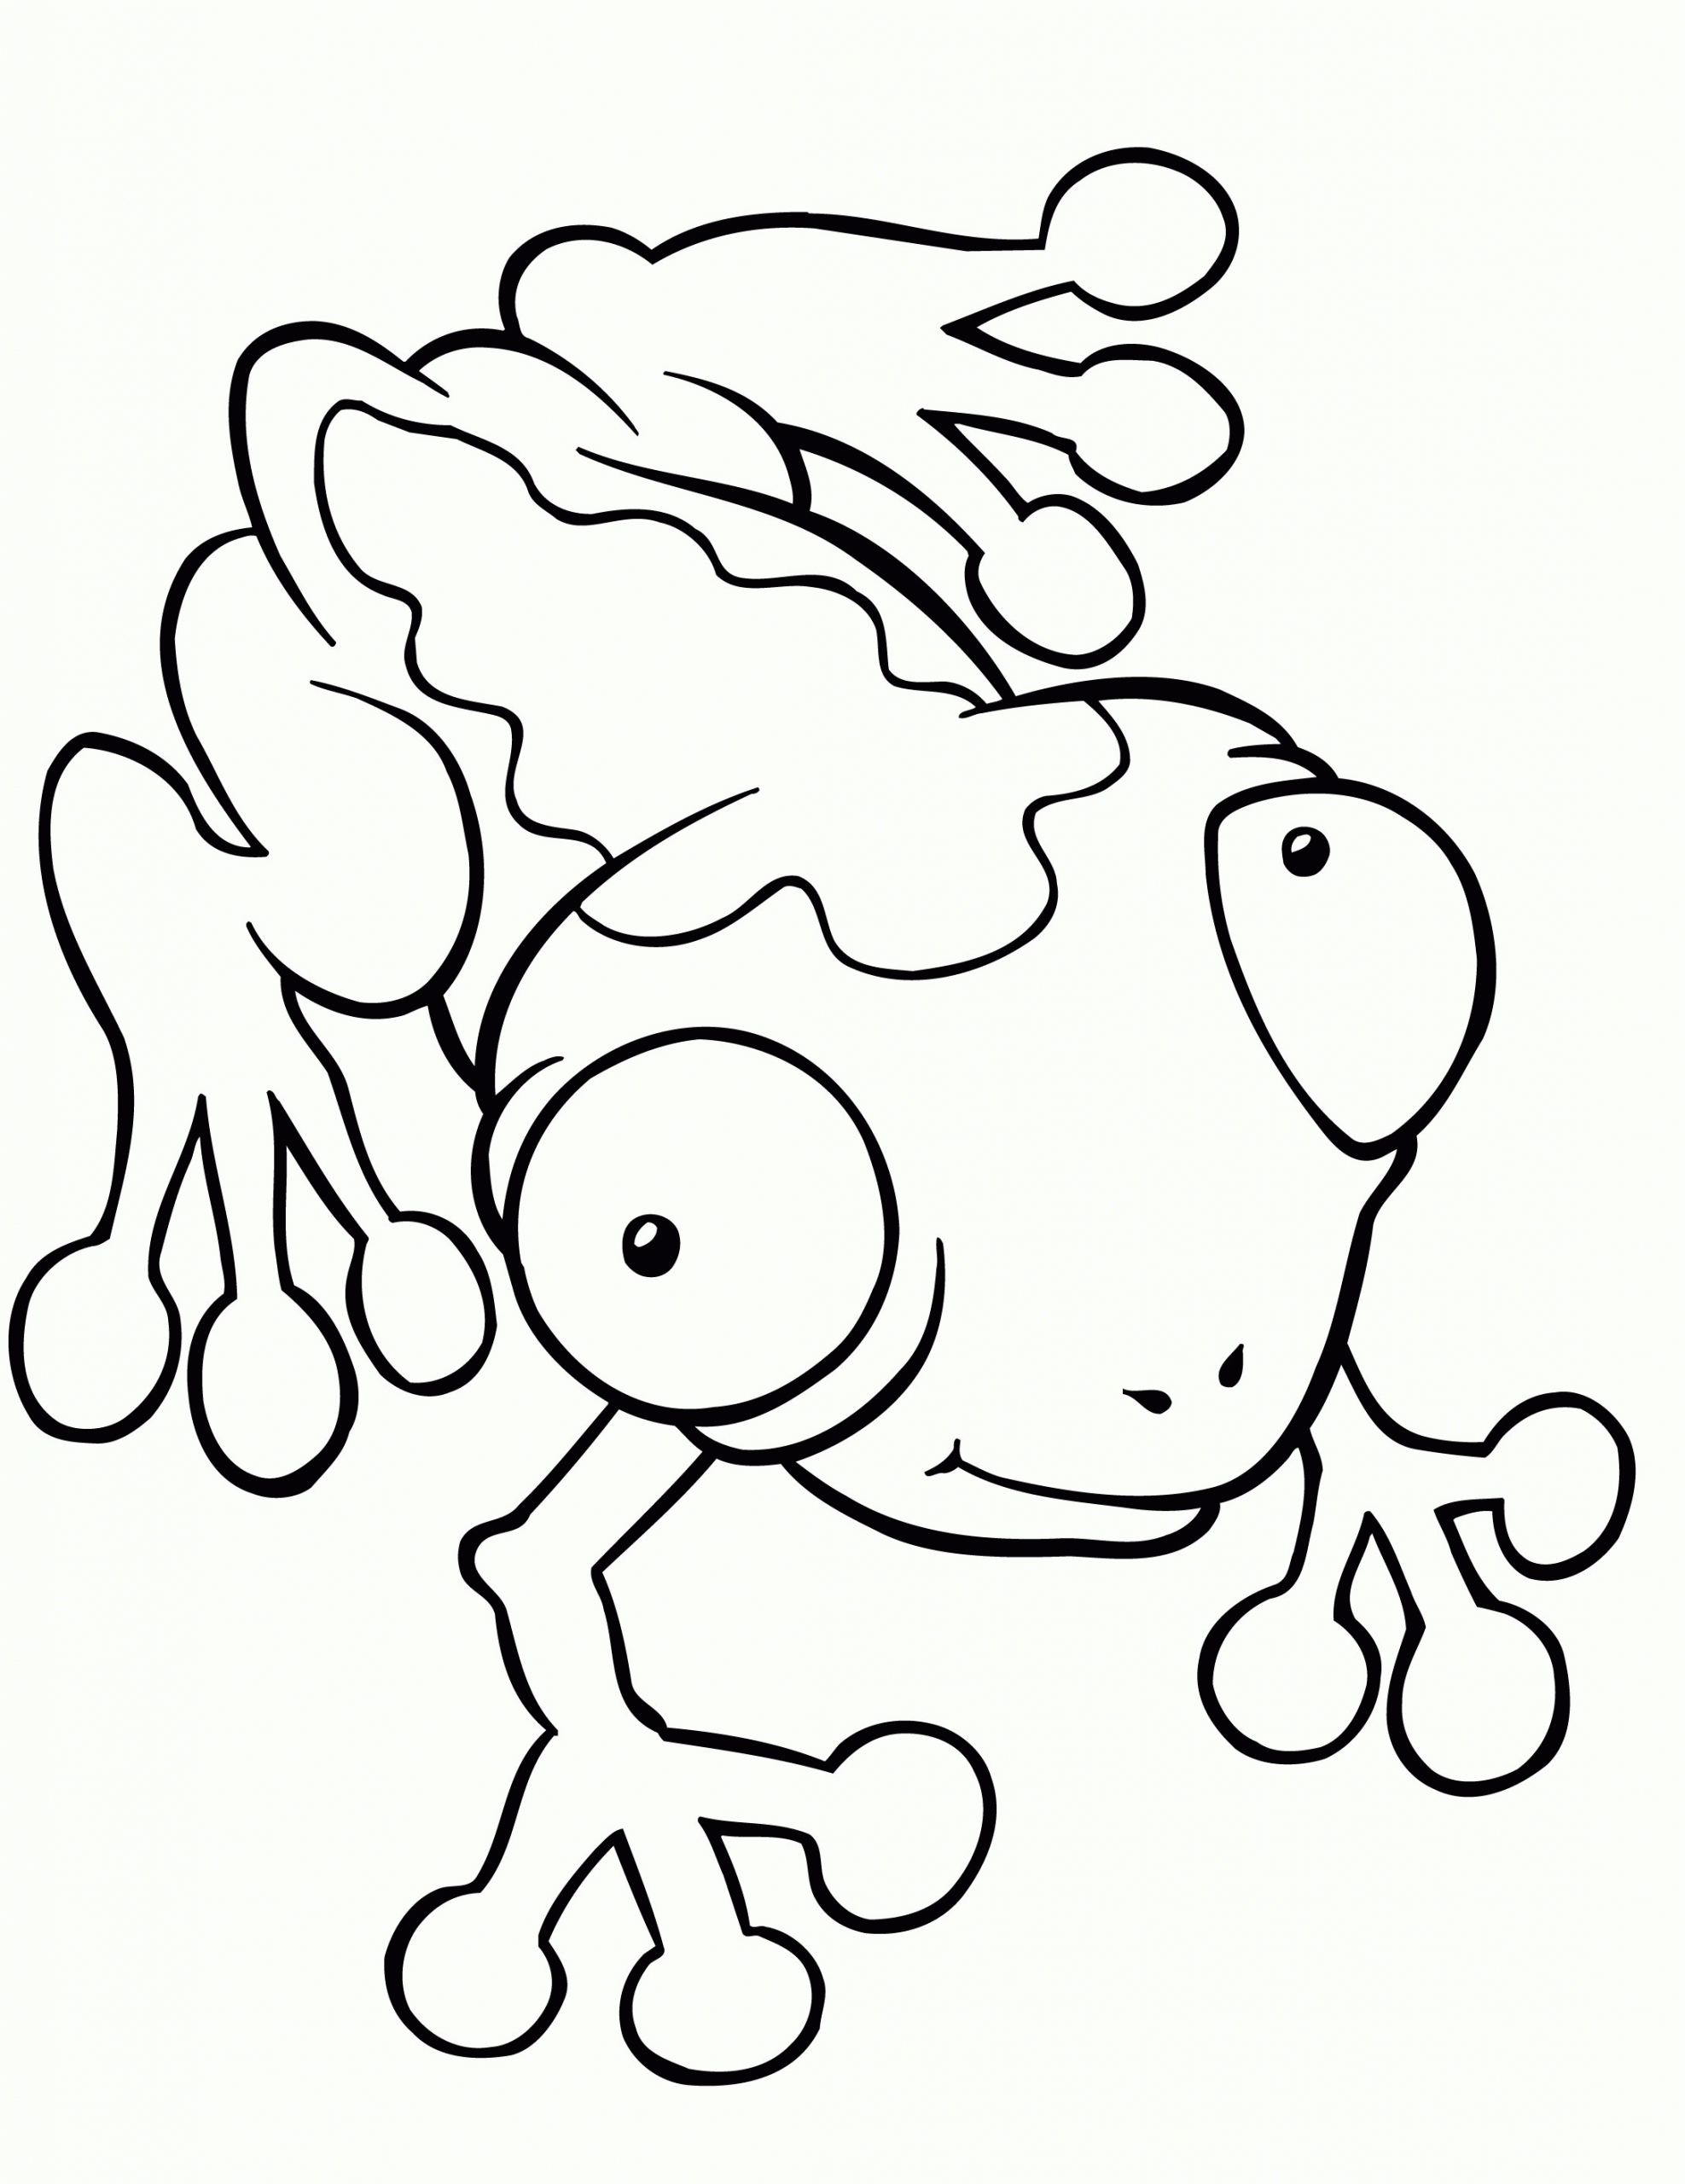 Baby Frog Coloring Pages
 Cute Toad Coloring Pages To Print Coloring Home